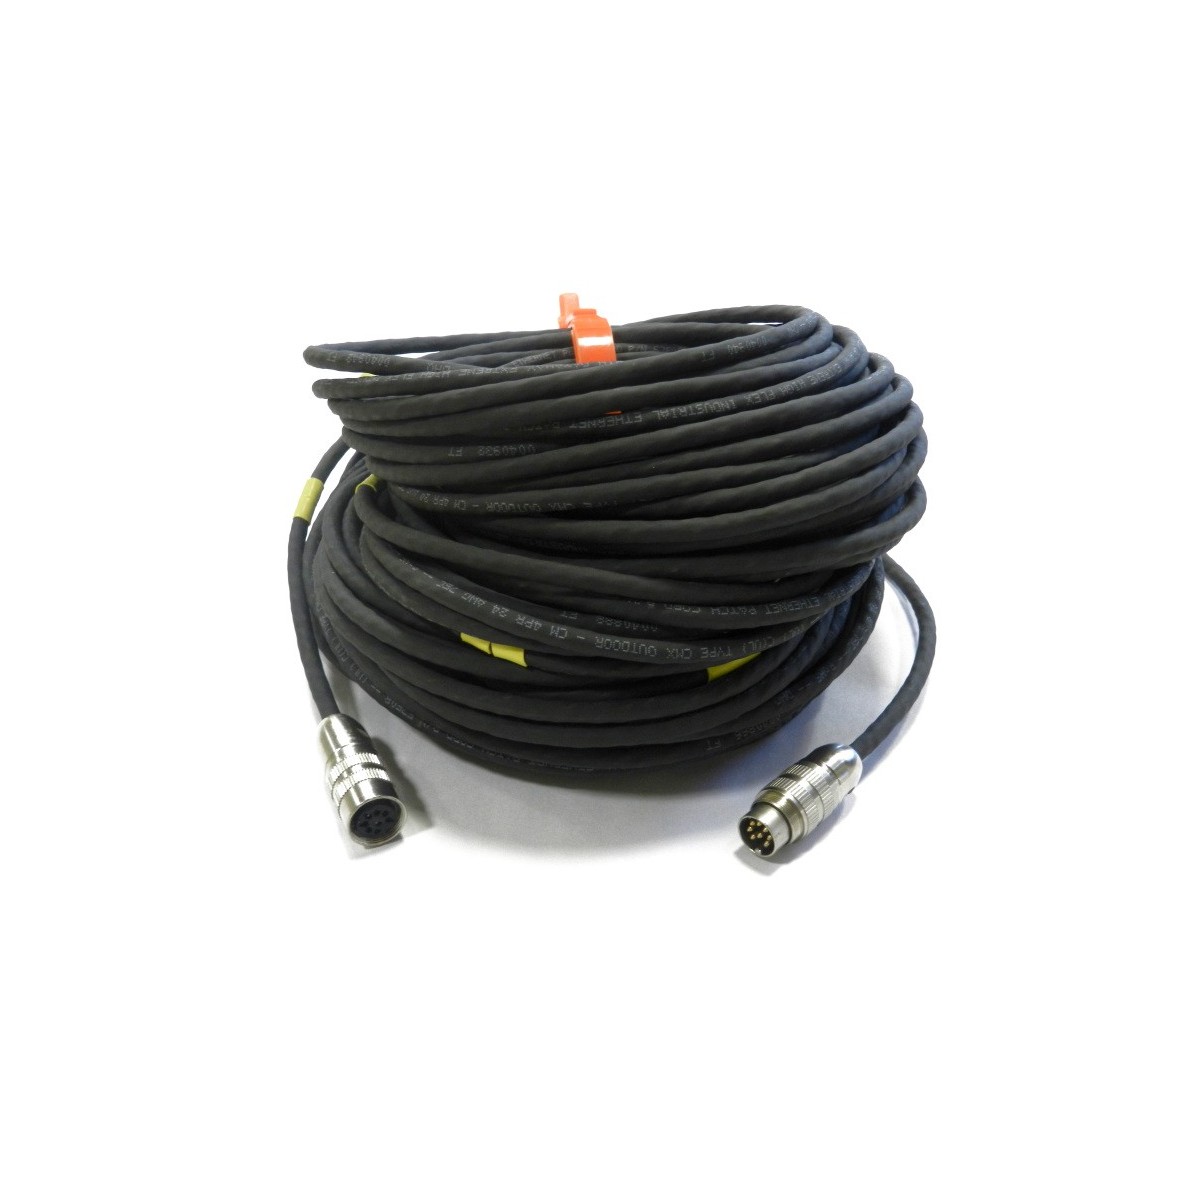 Aquabotix 125 Ft Cable Extension for HydroView